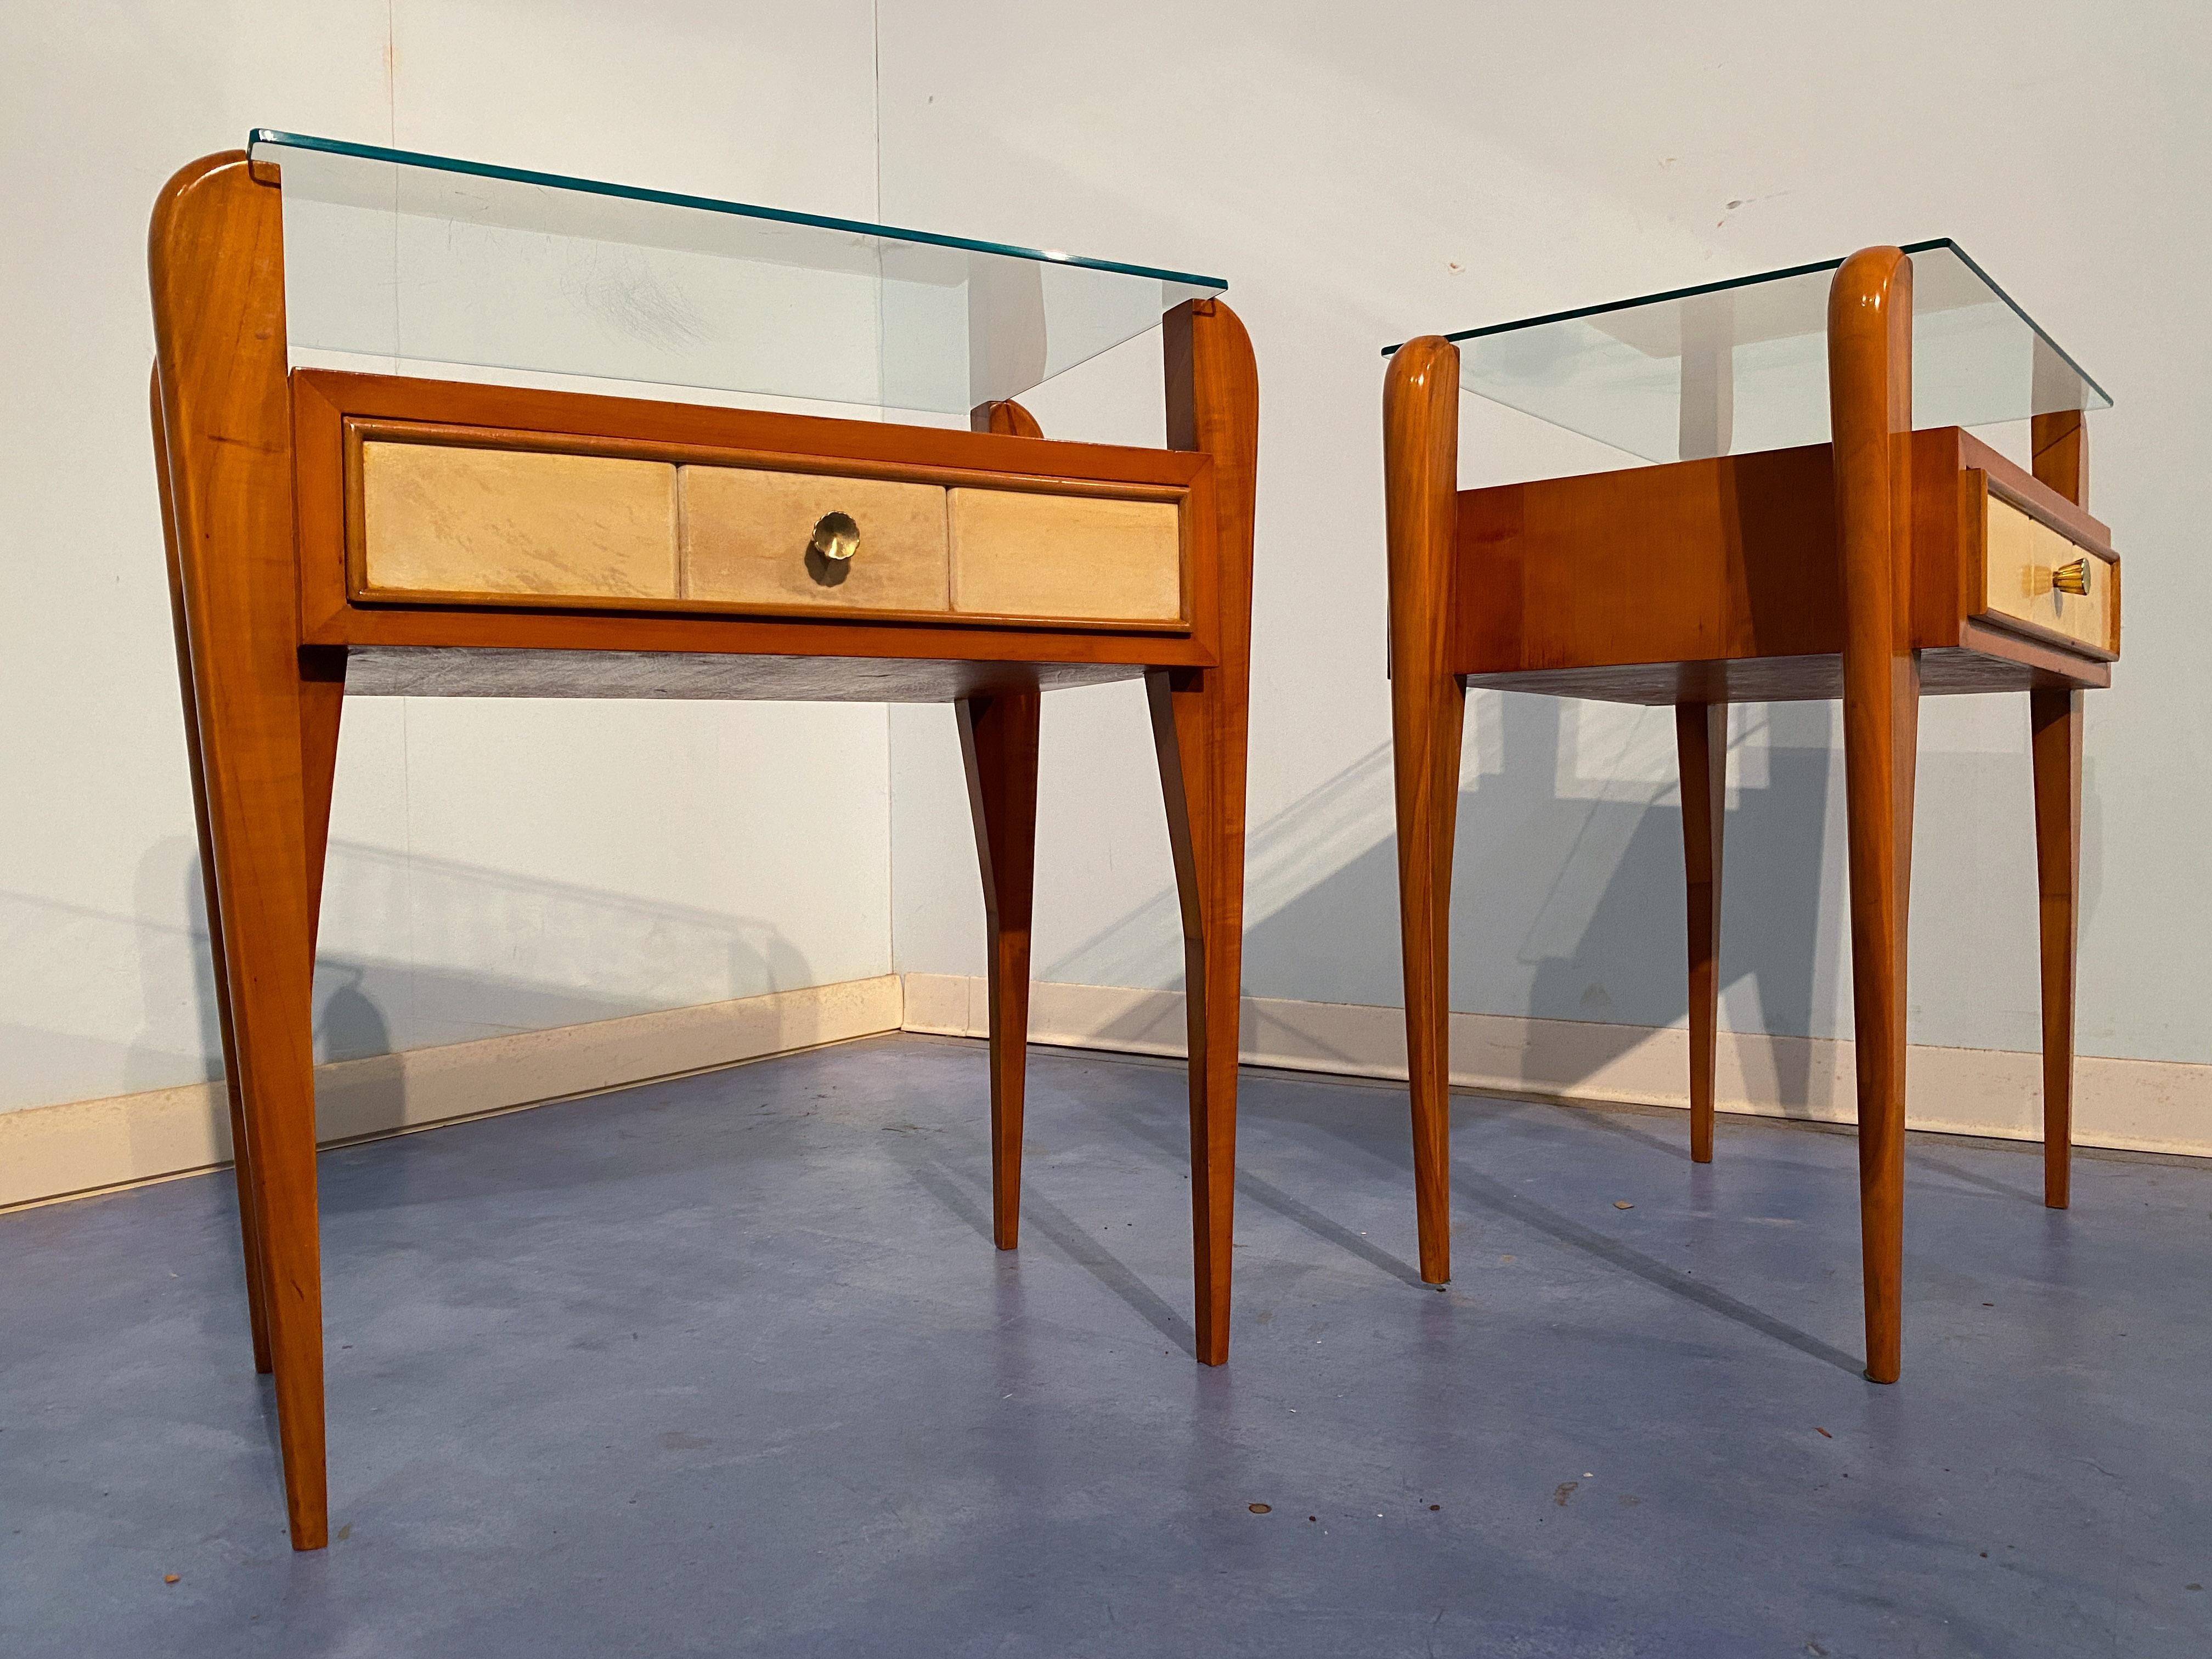 Italian Mid-Century Parchment Bedside or Nightstands by Osvaldo Borsani, 1950 For Sale 1